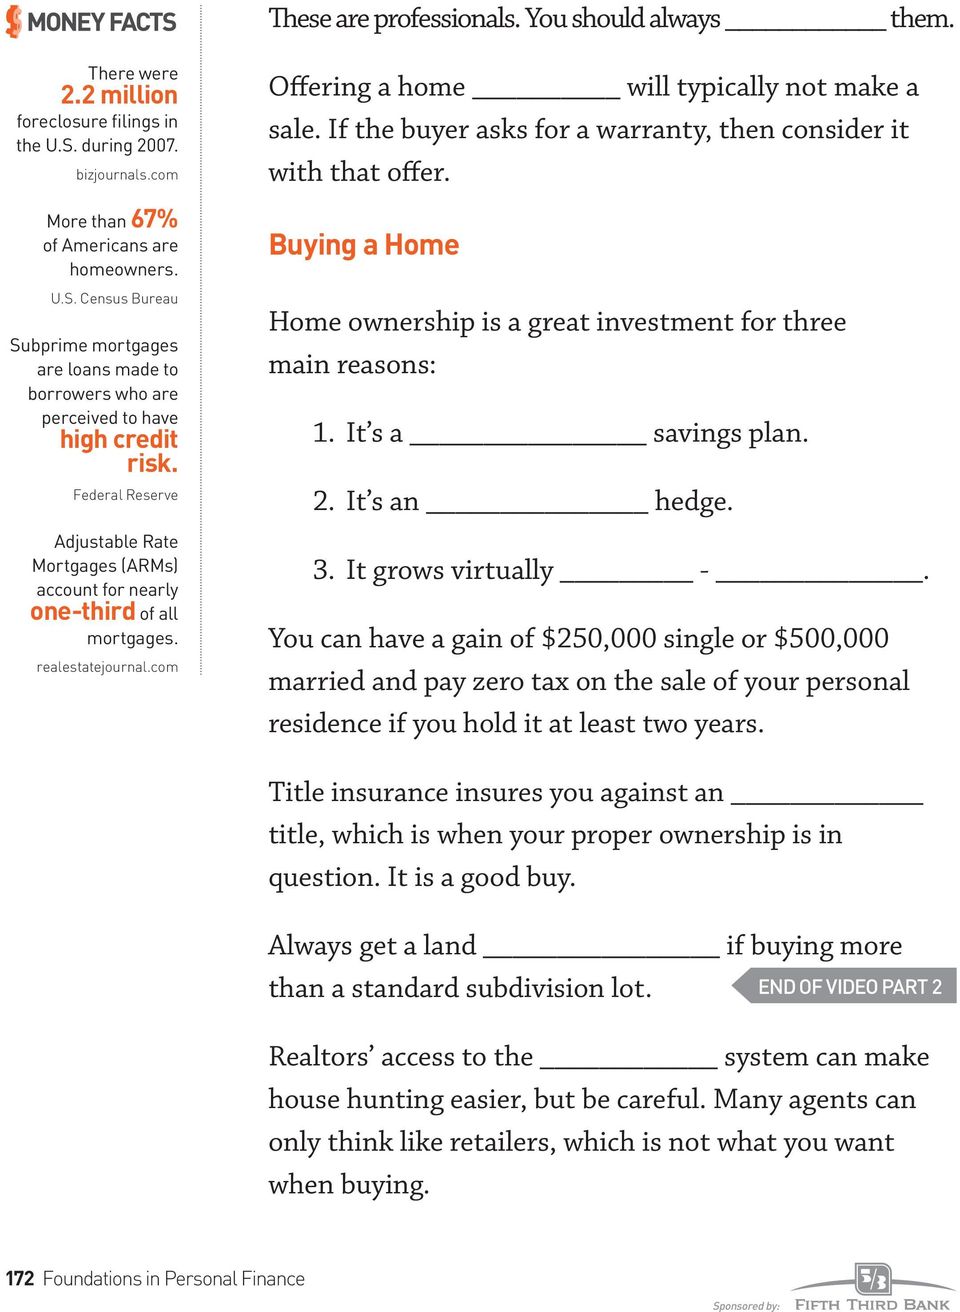 Federal Reserve Adjustable Rate Mortgages (ARMs) account for nearly one-third of all mortgages. realestatejournal.com Offering a home will typically not make a sale.